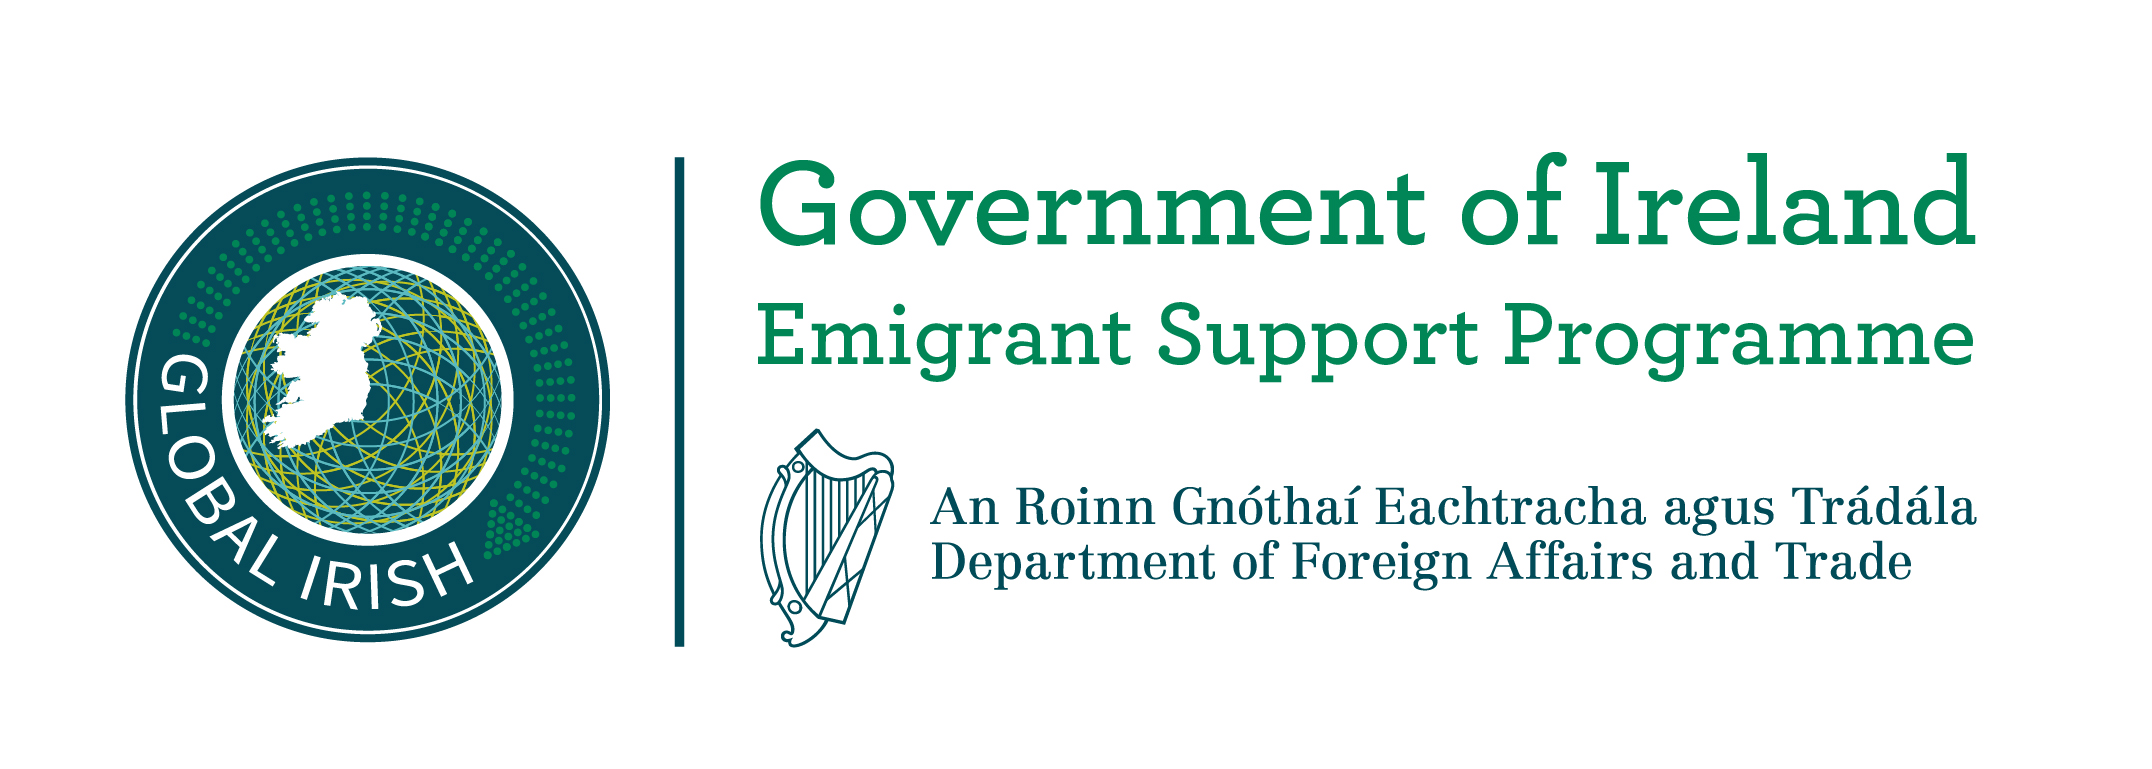 Call for Applications for the Emigrant Support Programme 2019 is now OPEN